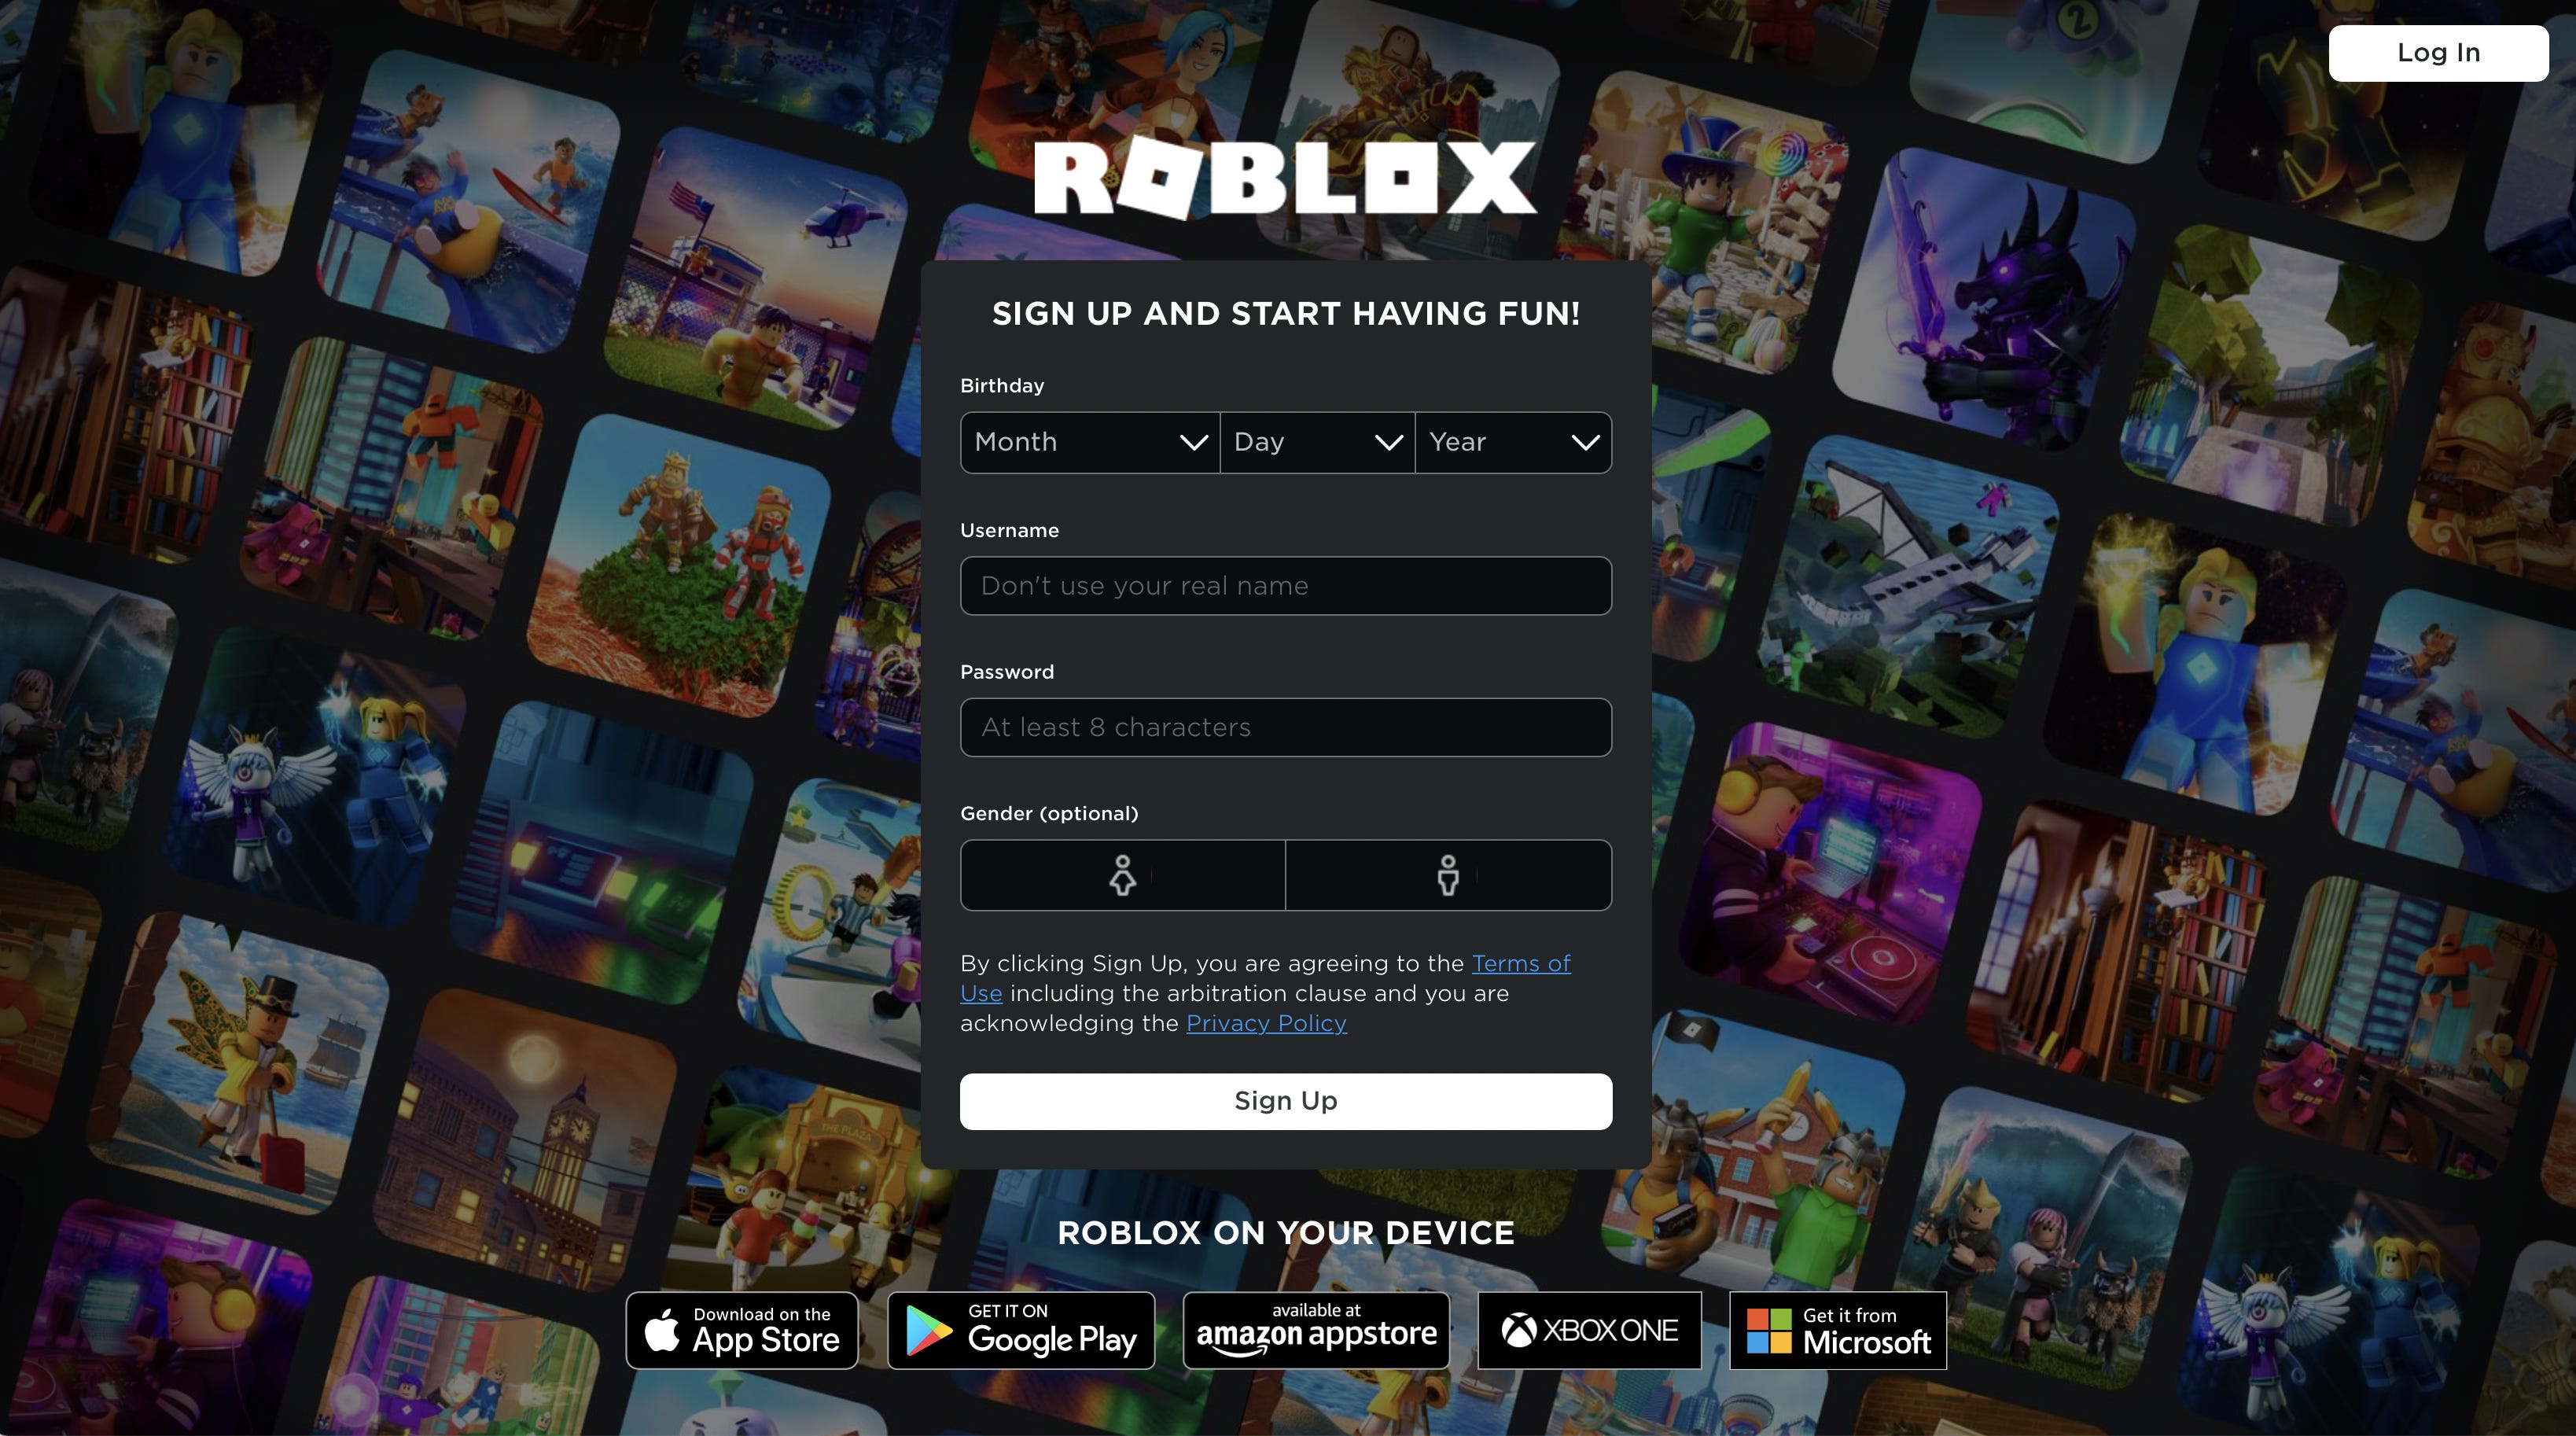 Roblox S Growth Strategies And Why Becoming A Metaverse Is A Bad Idea By Benjamin Schroeder No Ordinary Strategy - what community developed roblox